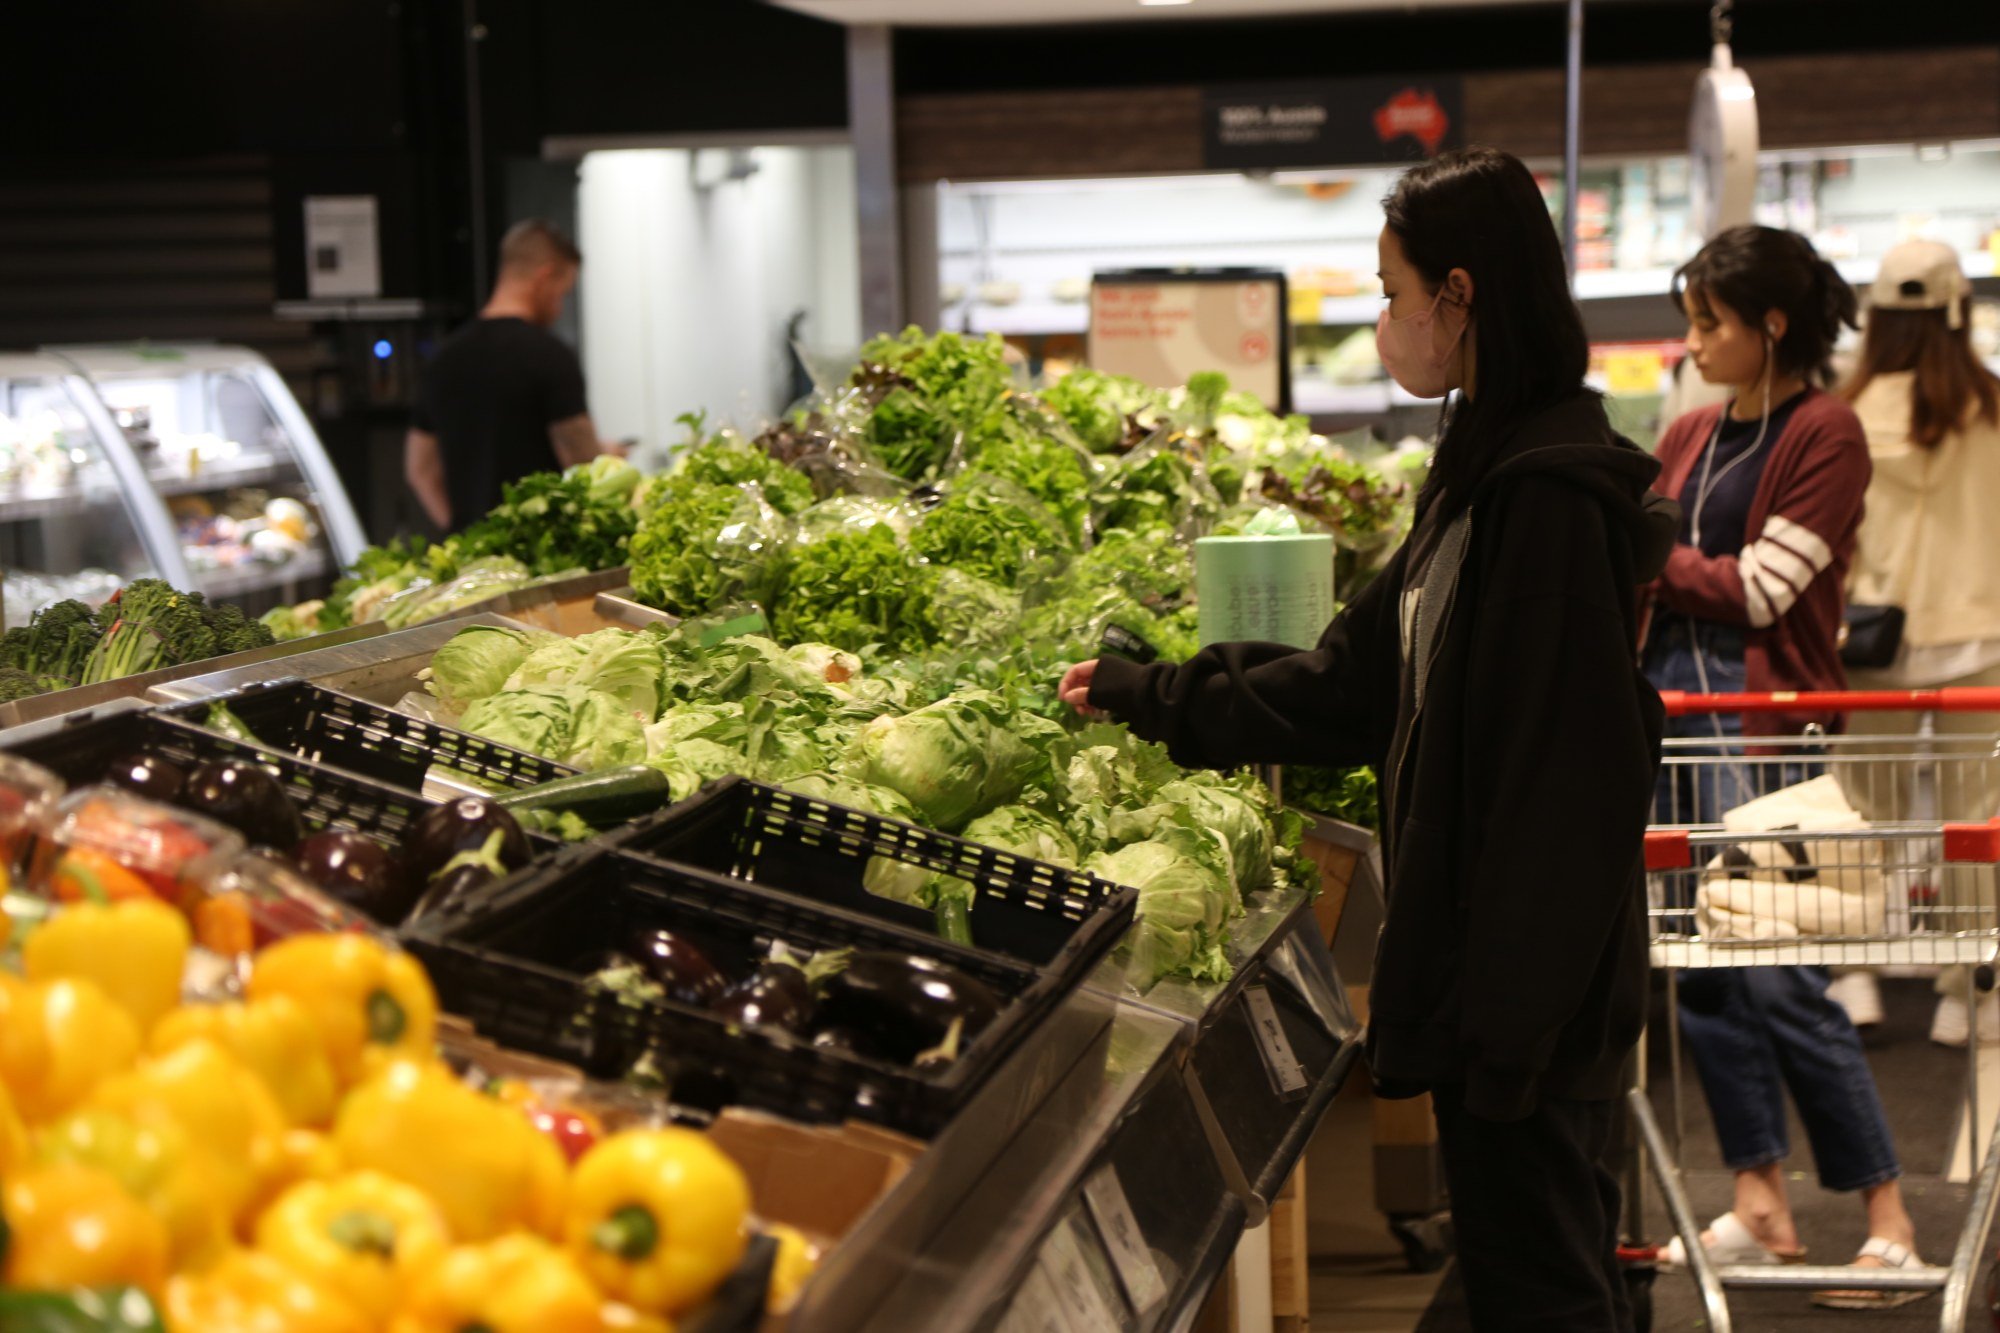 Customers buy vegetables at a supermarket in Sydney, Australia. Photo: Xinhua